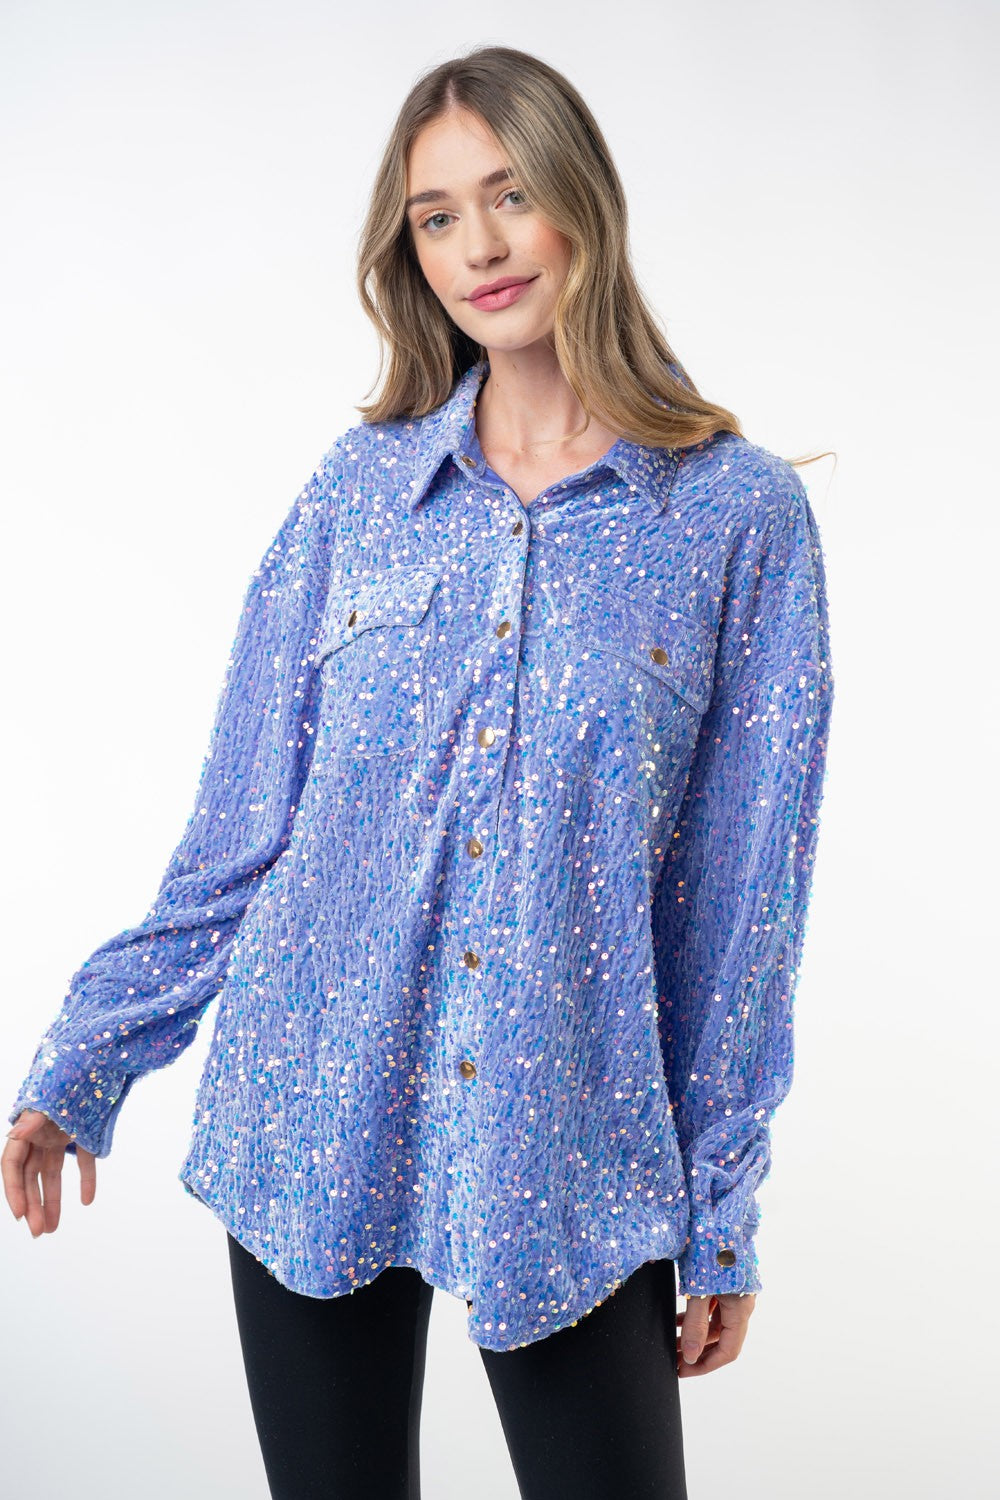 Periwinkle Long Sleeve Sequin Knit Top